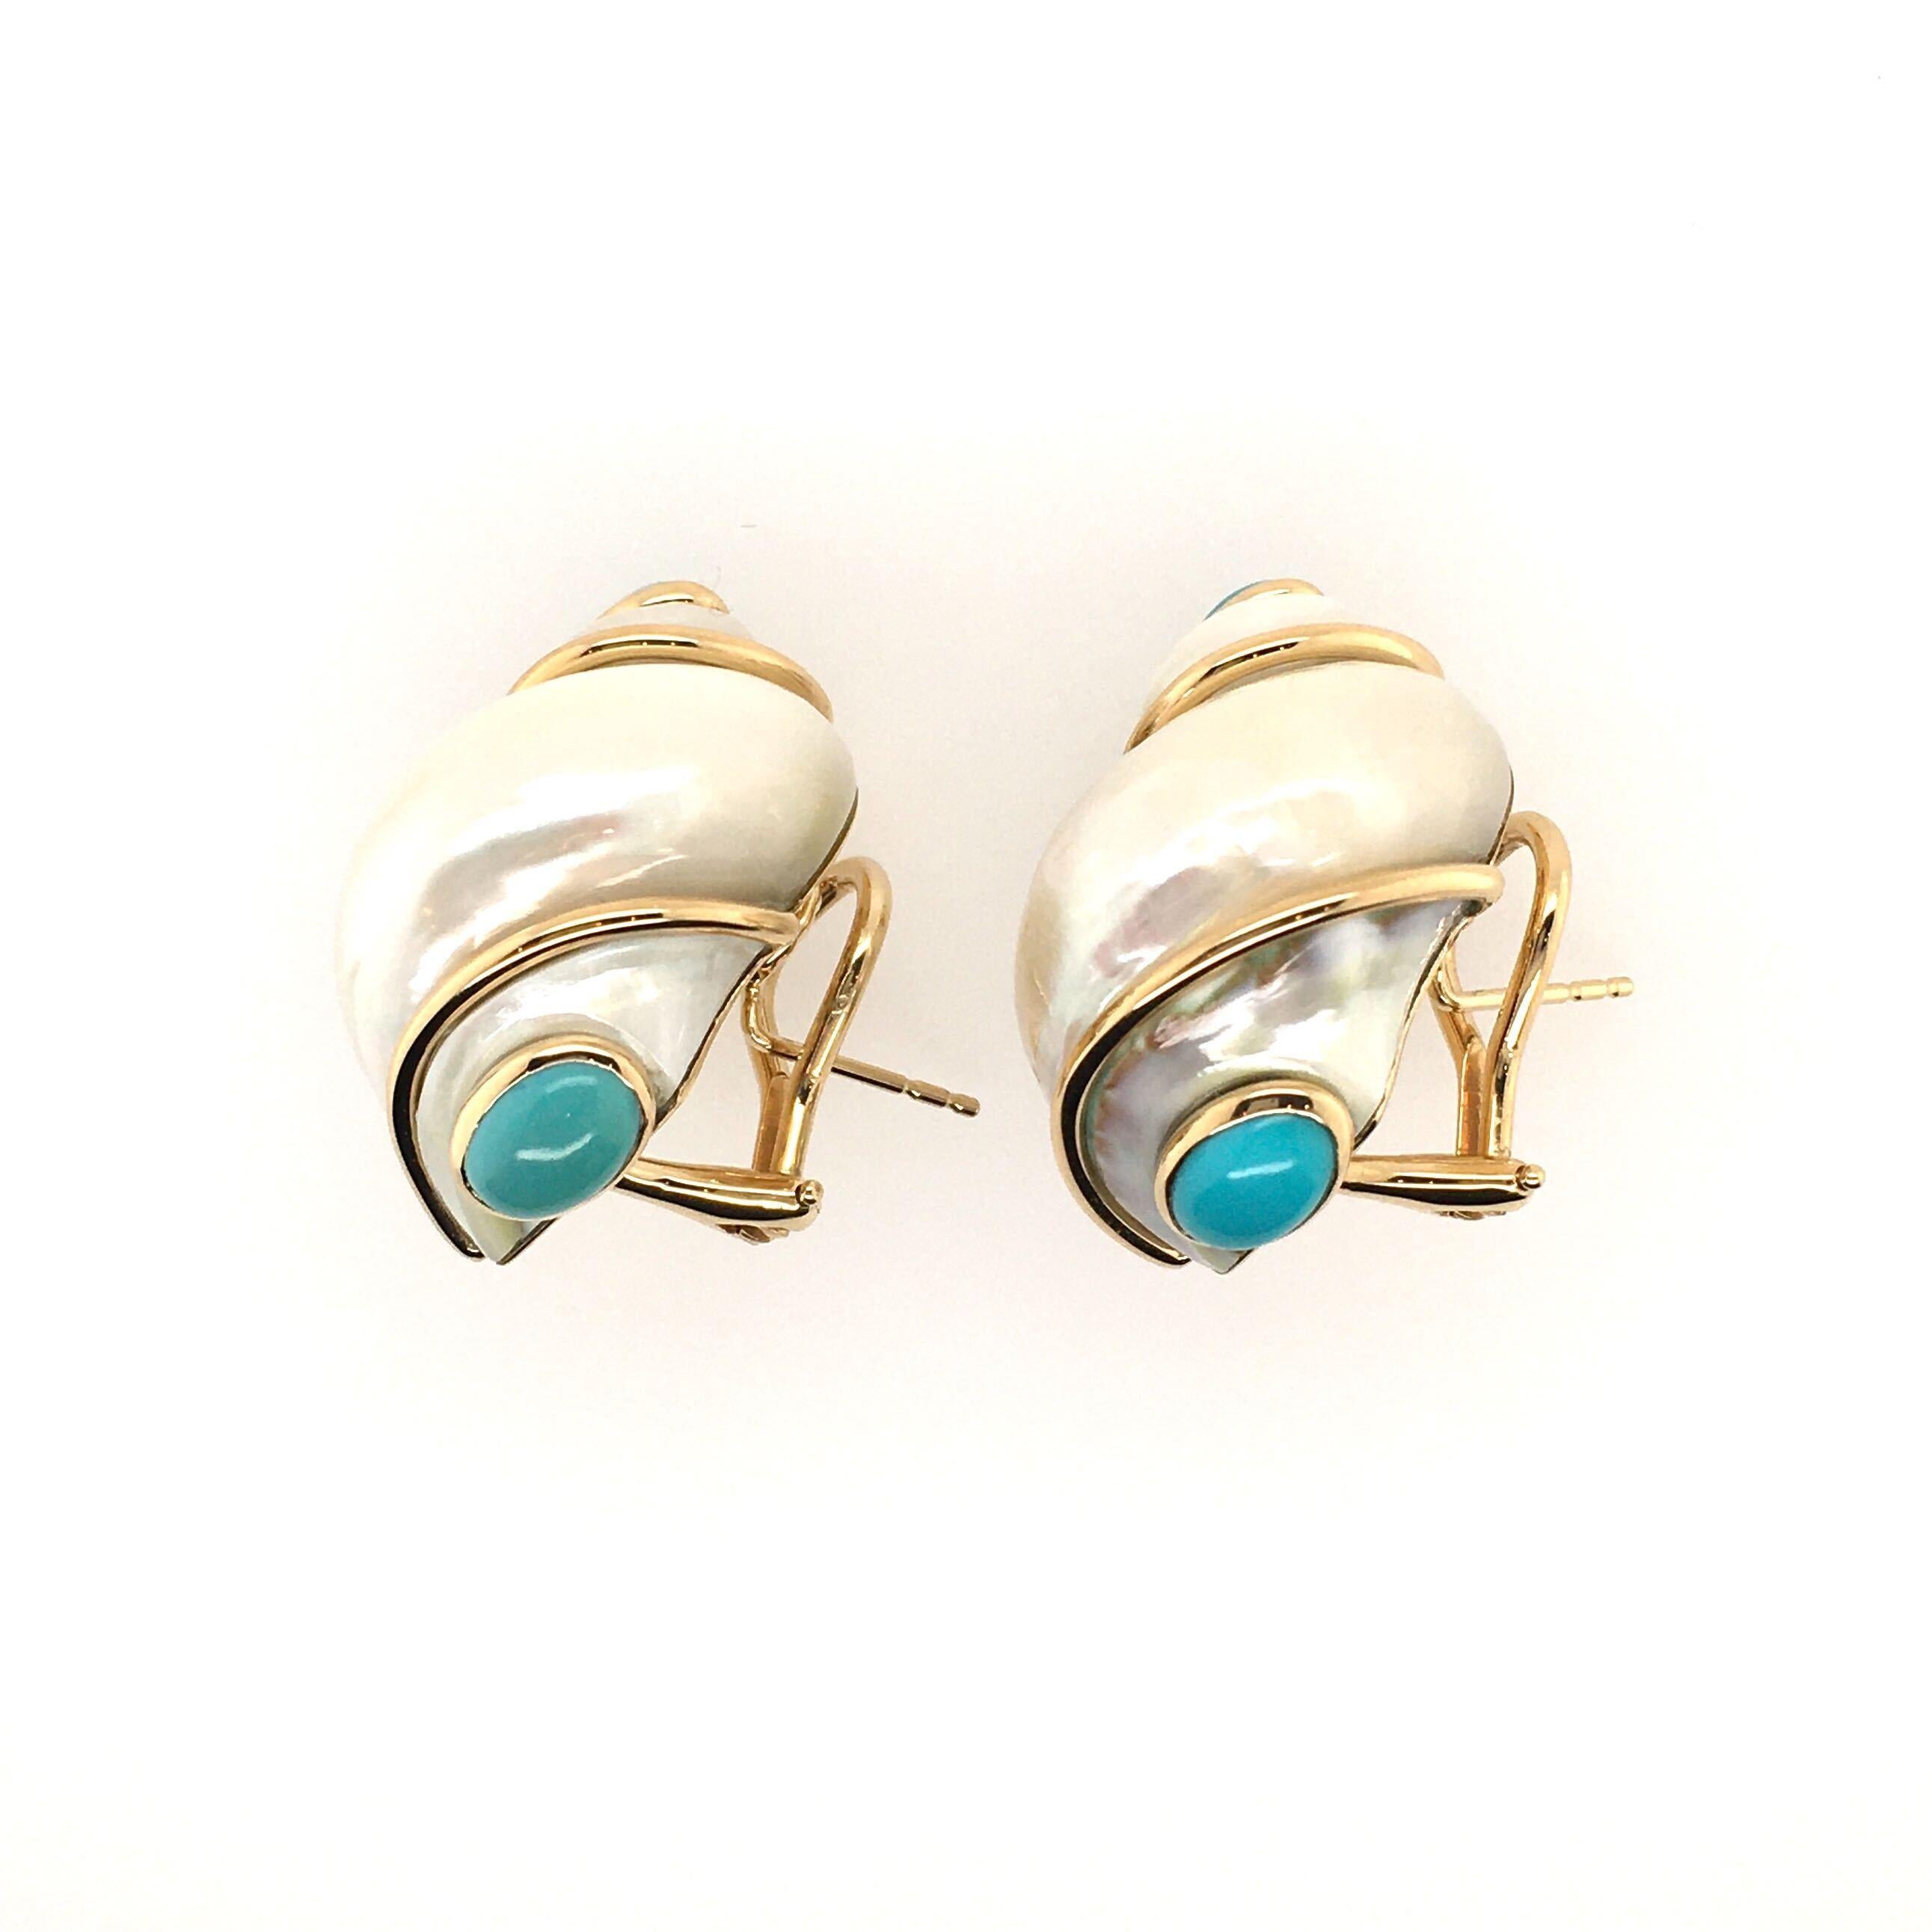 A pair 14 karat yellow gold , turbo shell and turquoise earrings. Seaman Schepps. Each set with a white turbo shell, wrapped in yellow gold wire, enhanced at each end by a cabochon turquoise. Length is approximately 1 inch, gross weight is